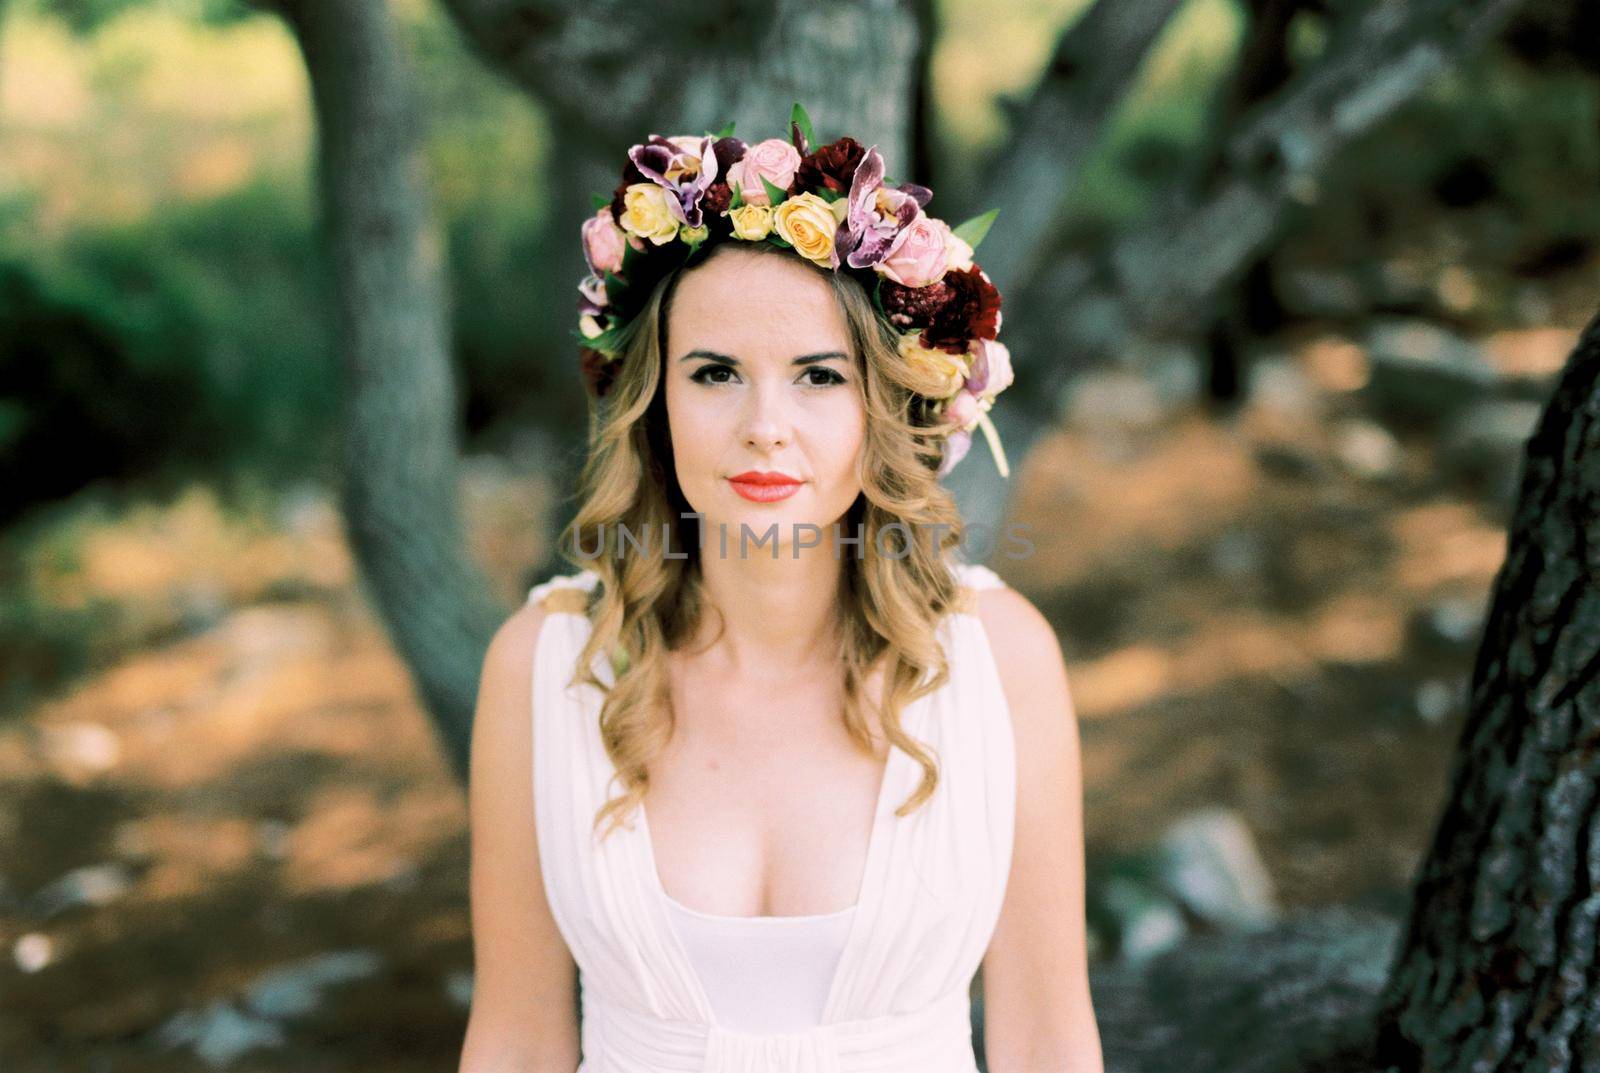 Bride in a wreath of multi-colored flowers on her head stands near a tree. High quality photo